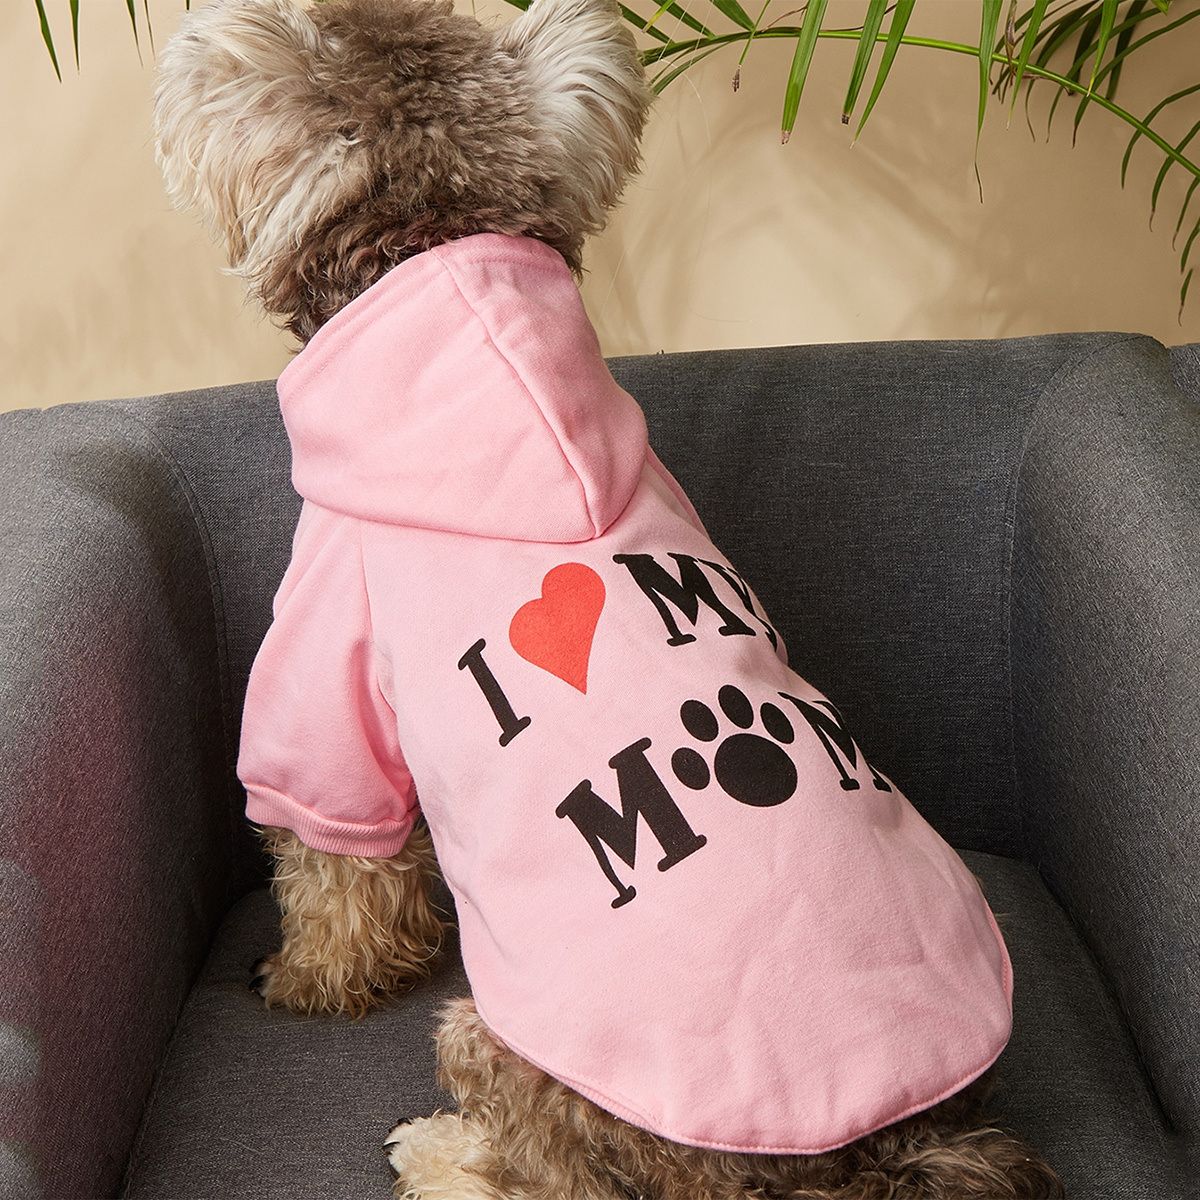 Burr, it's cold outside.  Just think how much more your dog will enjoy being outdoors in a warm coat or hoodie.  Pampermypuppies has a nice selection of outerwear perfect for this time of year.  #dogcoat,#wintergear,#doghoodie,#dogsweater